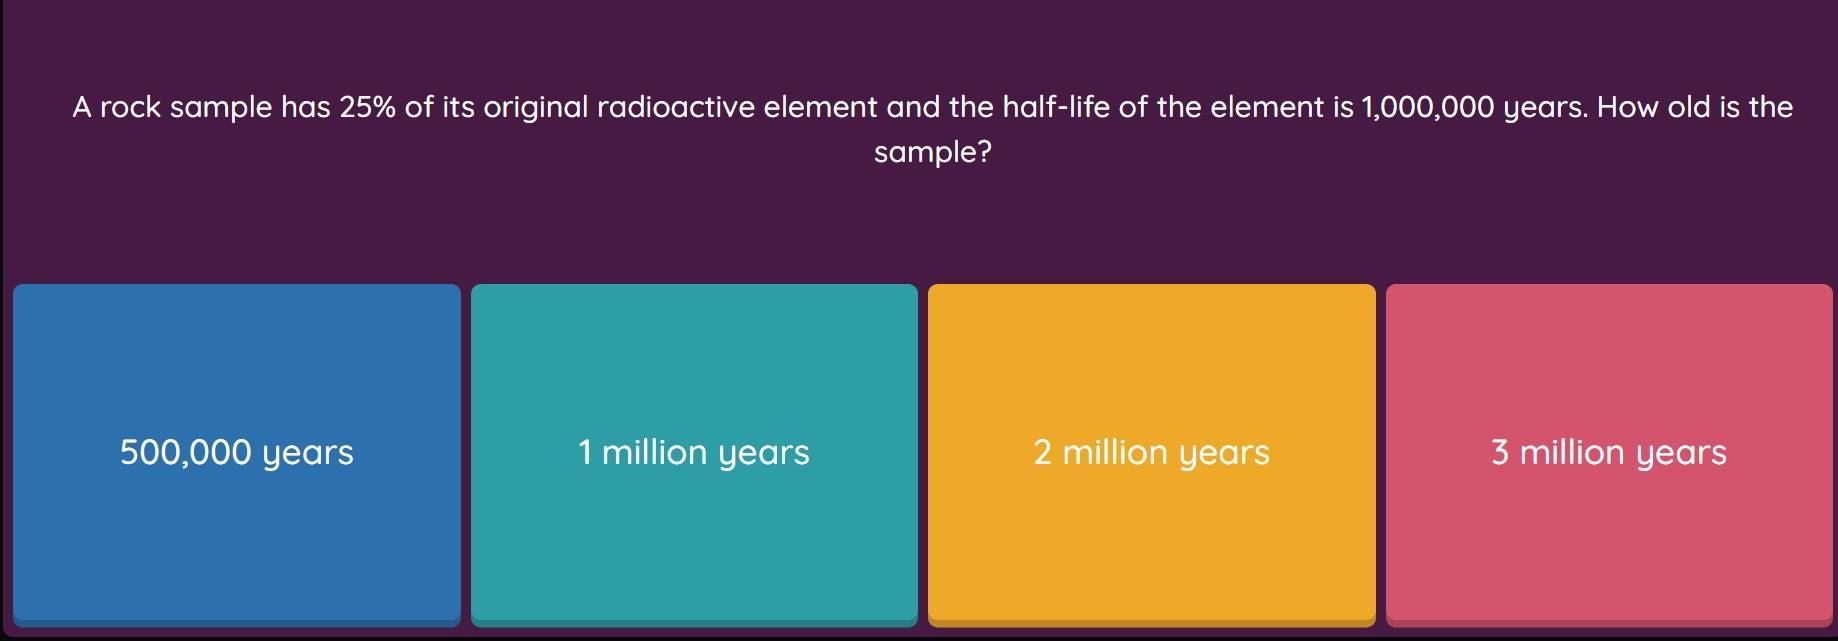 A Rock Sample Has 25% Of Its Original Radioactive Element And The Half-life Of The Element Is 1 Million